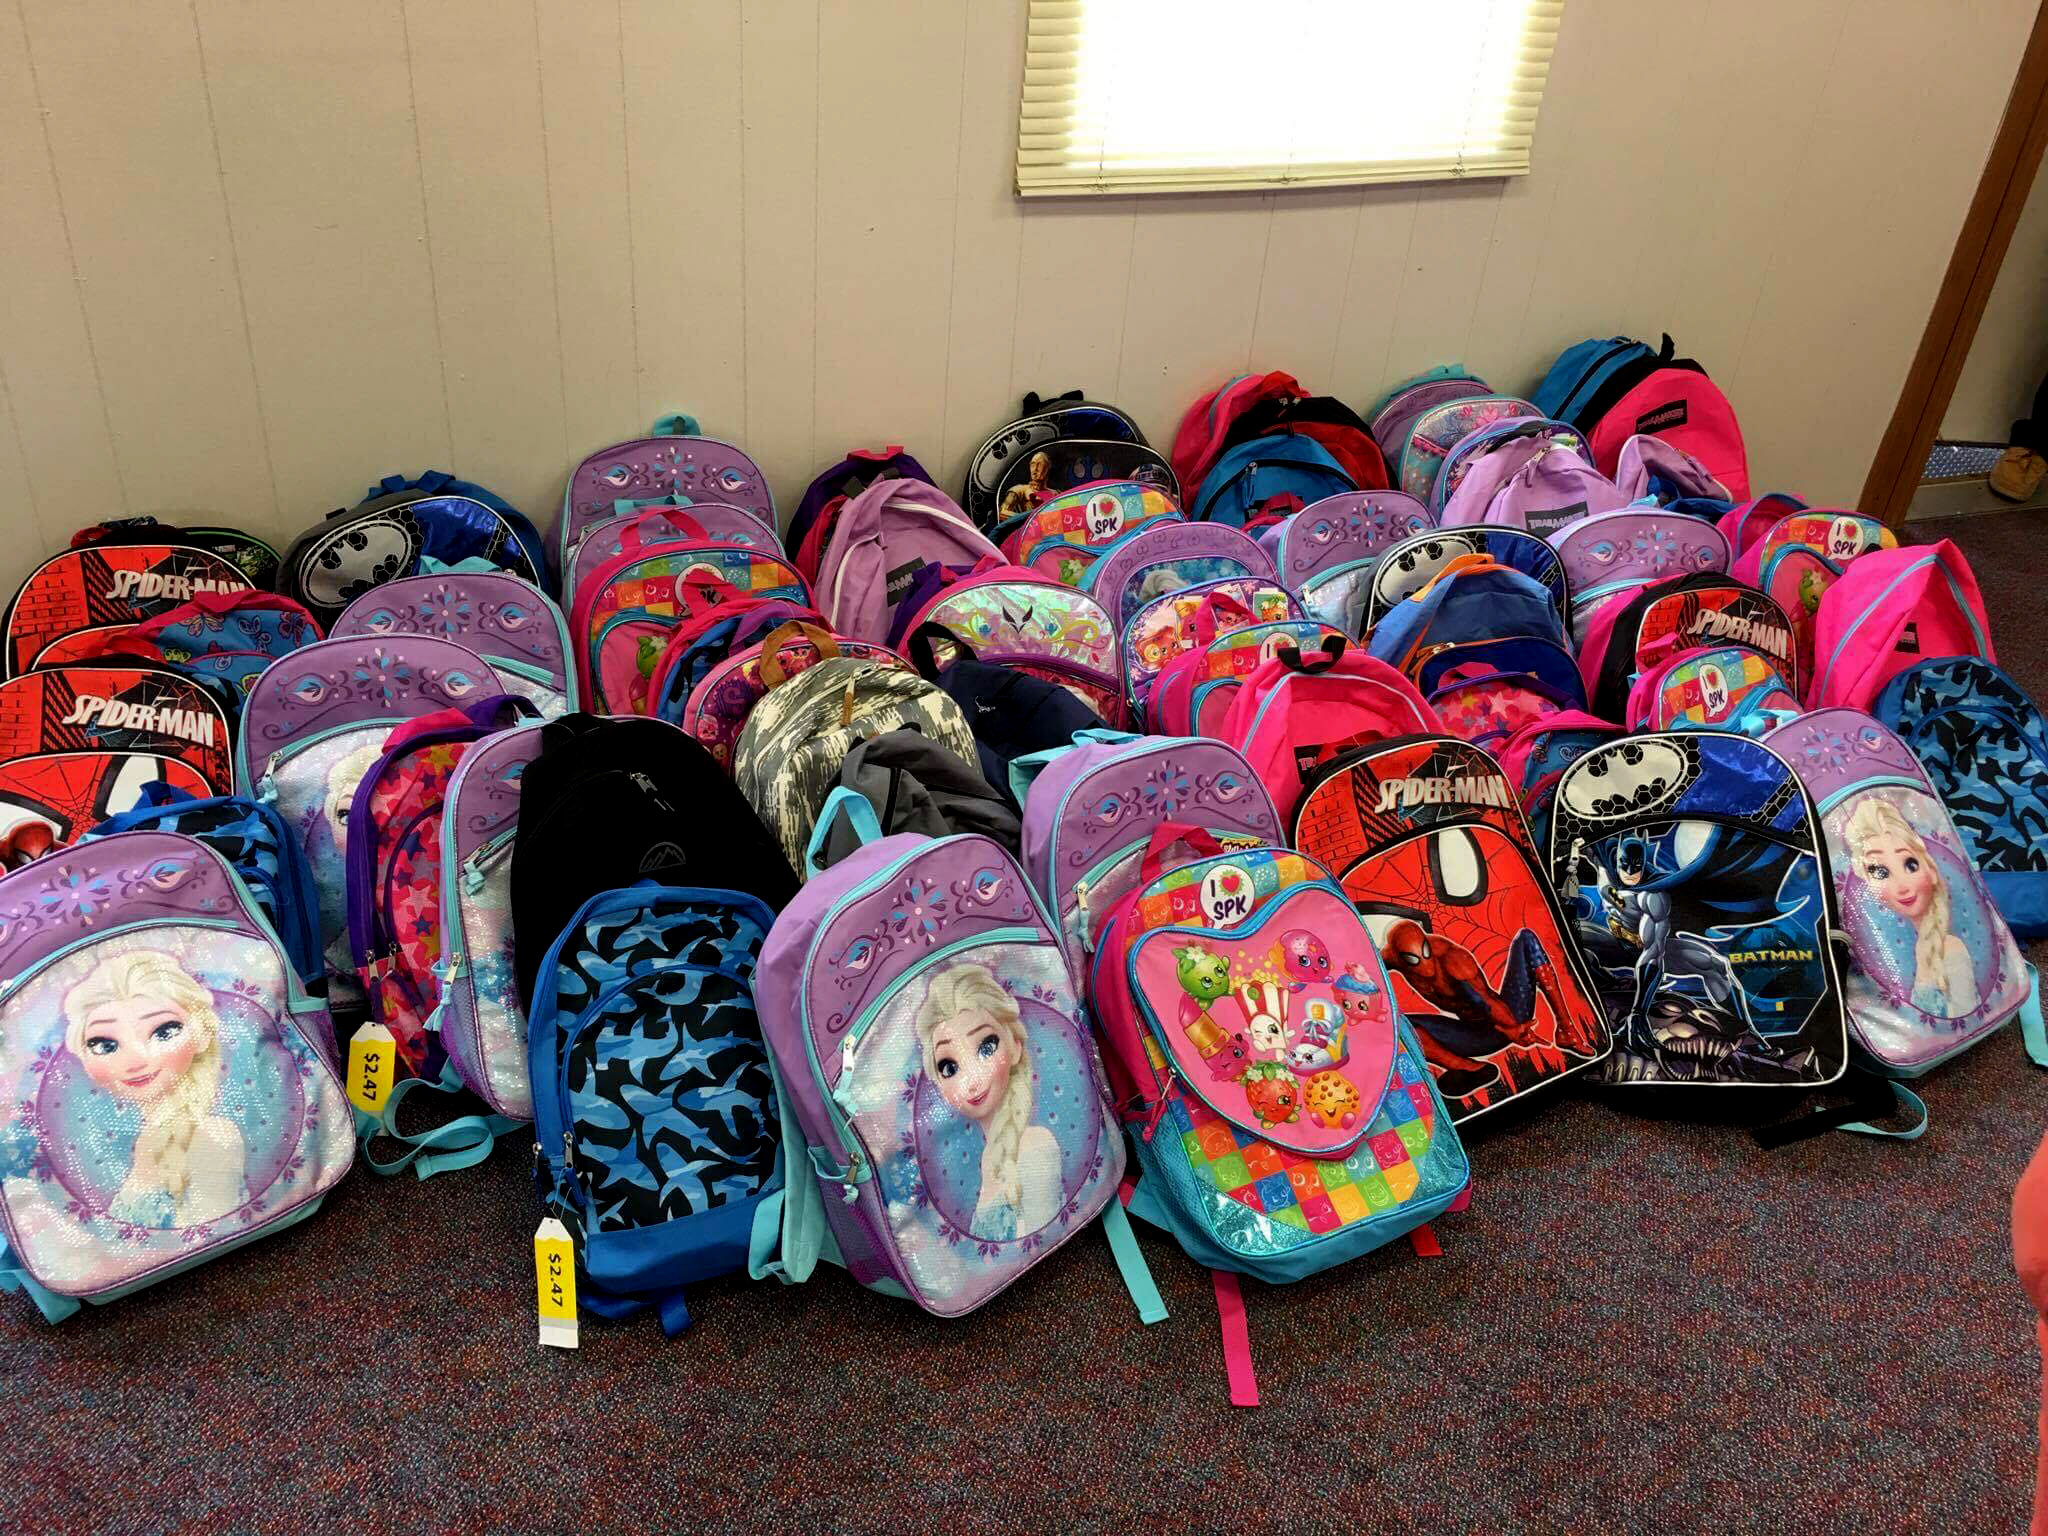 PHOTO:Destiny Klimaszewski of Foristell, Mo., started a school supplies drive in honor of her late son Parker Mantia and late husband, Corey Mantia.